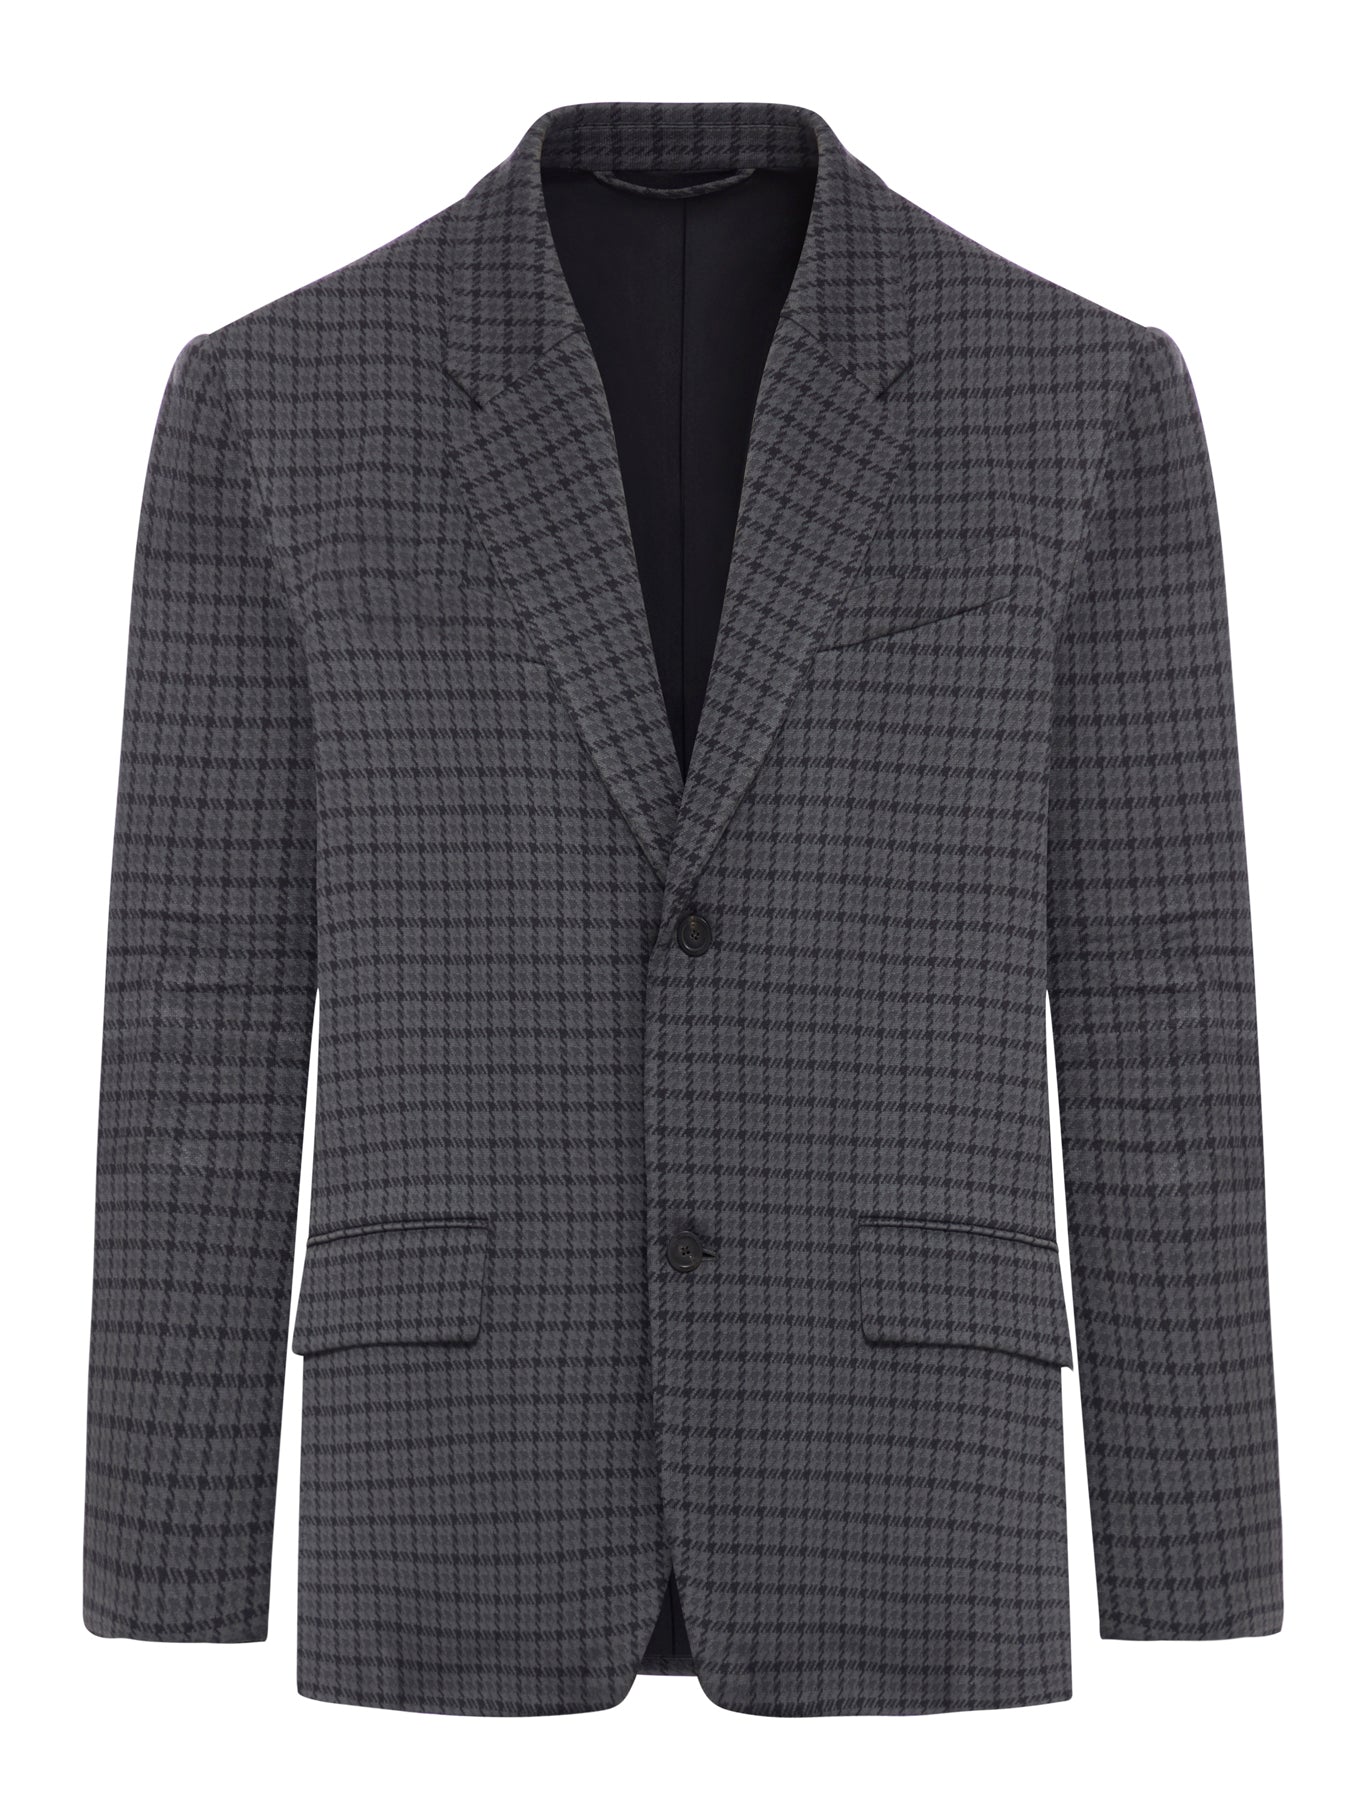 Tailored knit jacket with gray houndstooth pattern